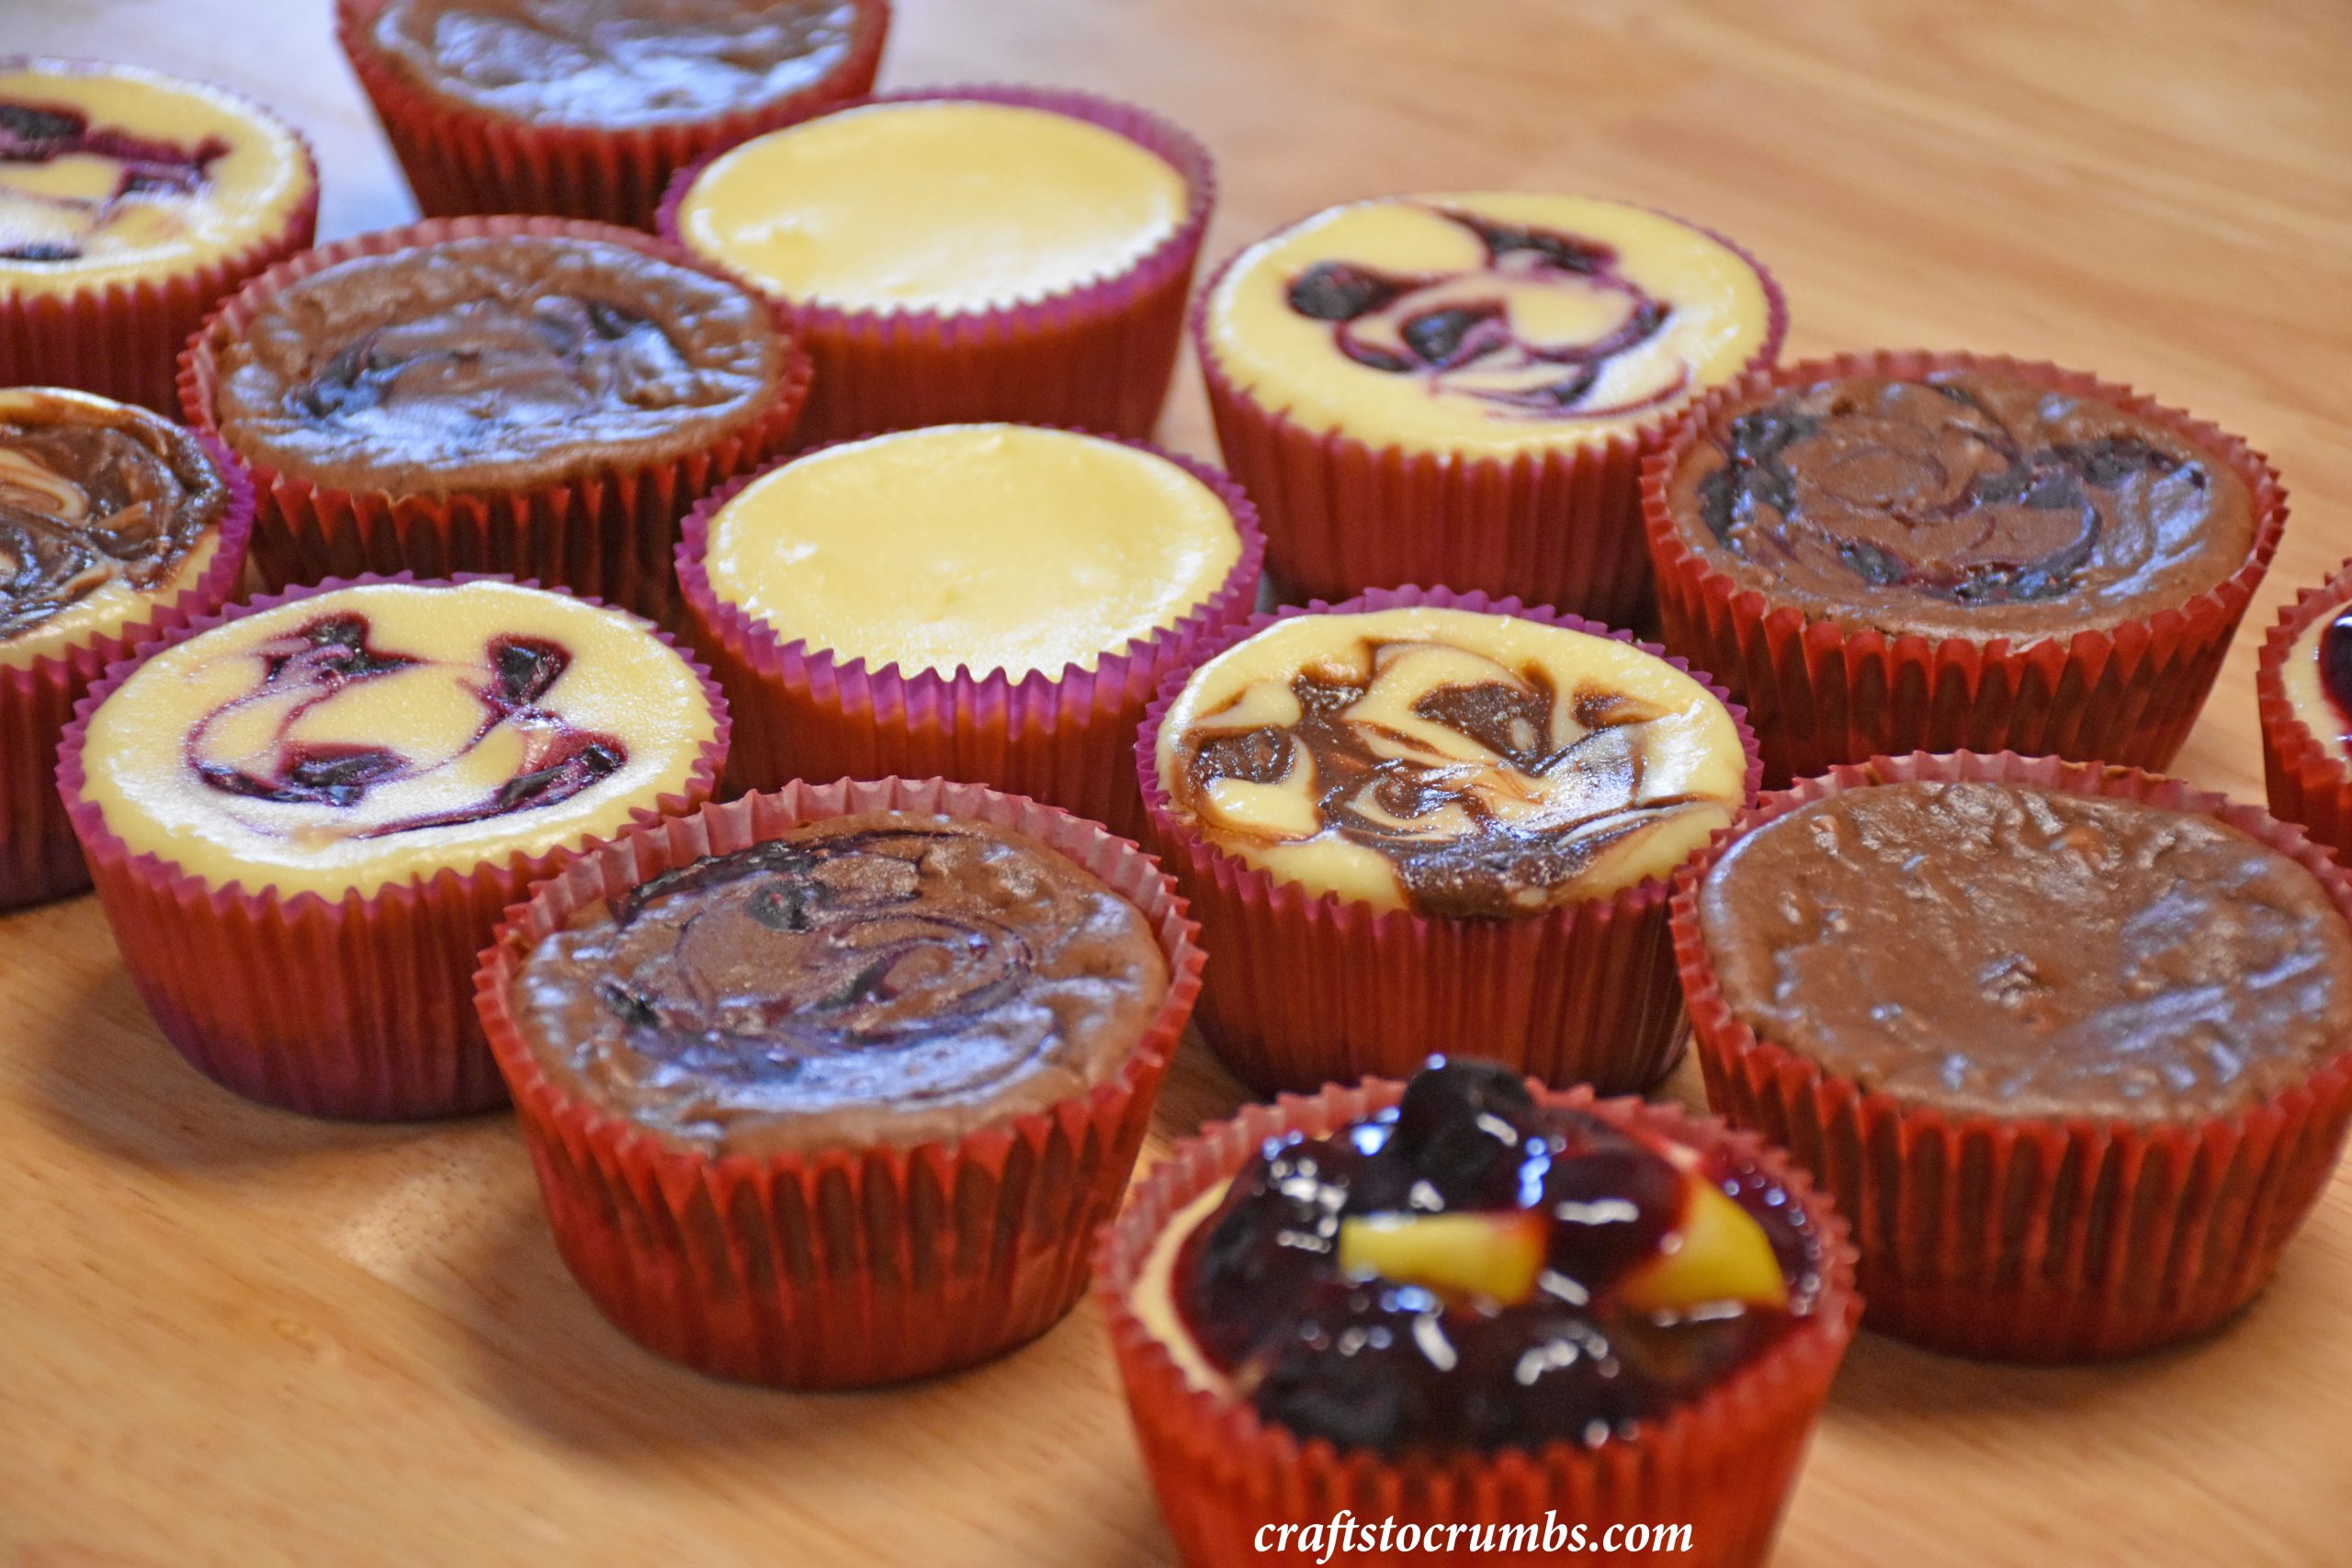 Crafts to Crumbs Mini Cheesecakes